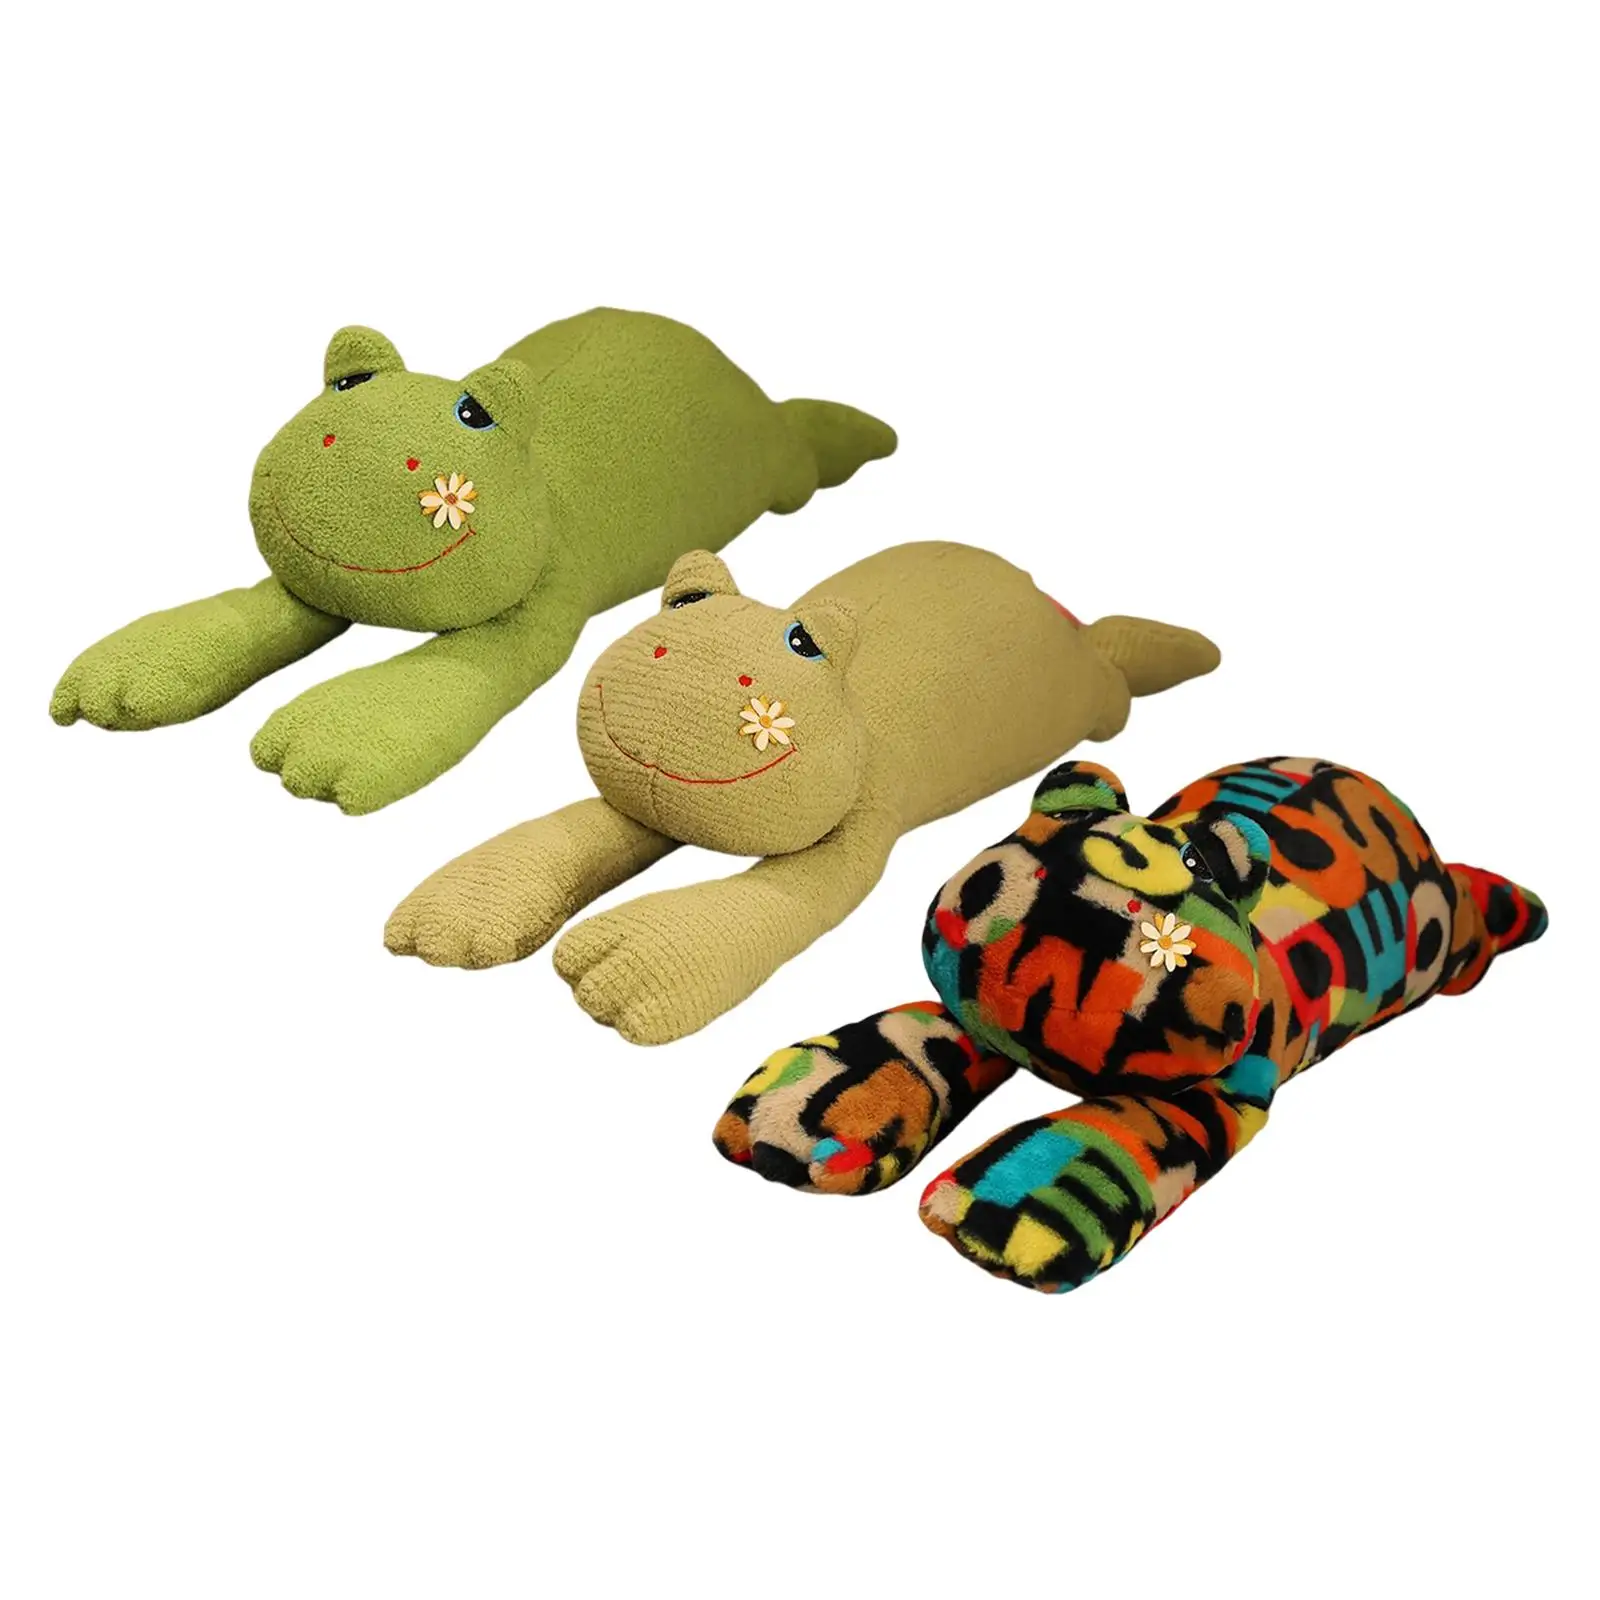 Adorable Frog Plush Toy pillow ,Home Decoration ,Soft Stuffed Animal for Theme Party